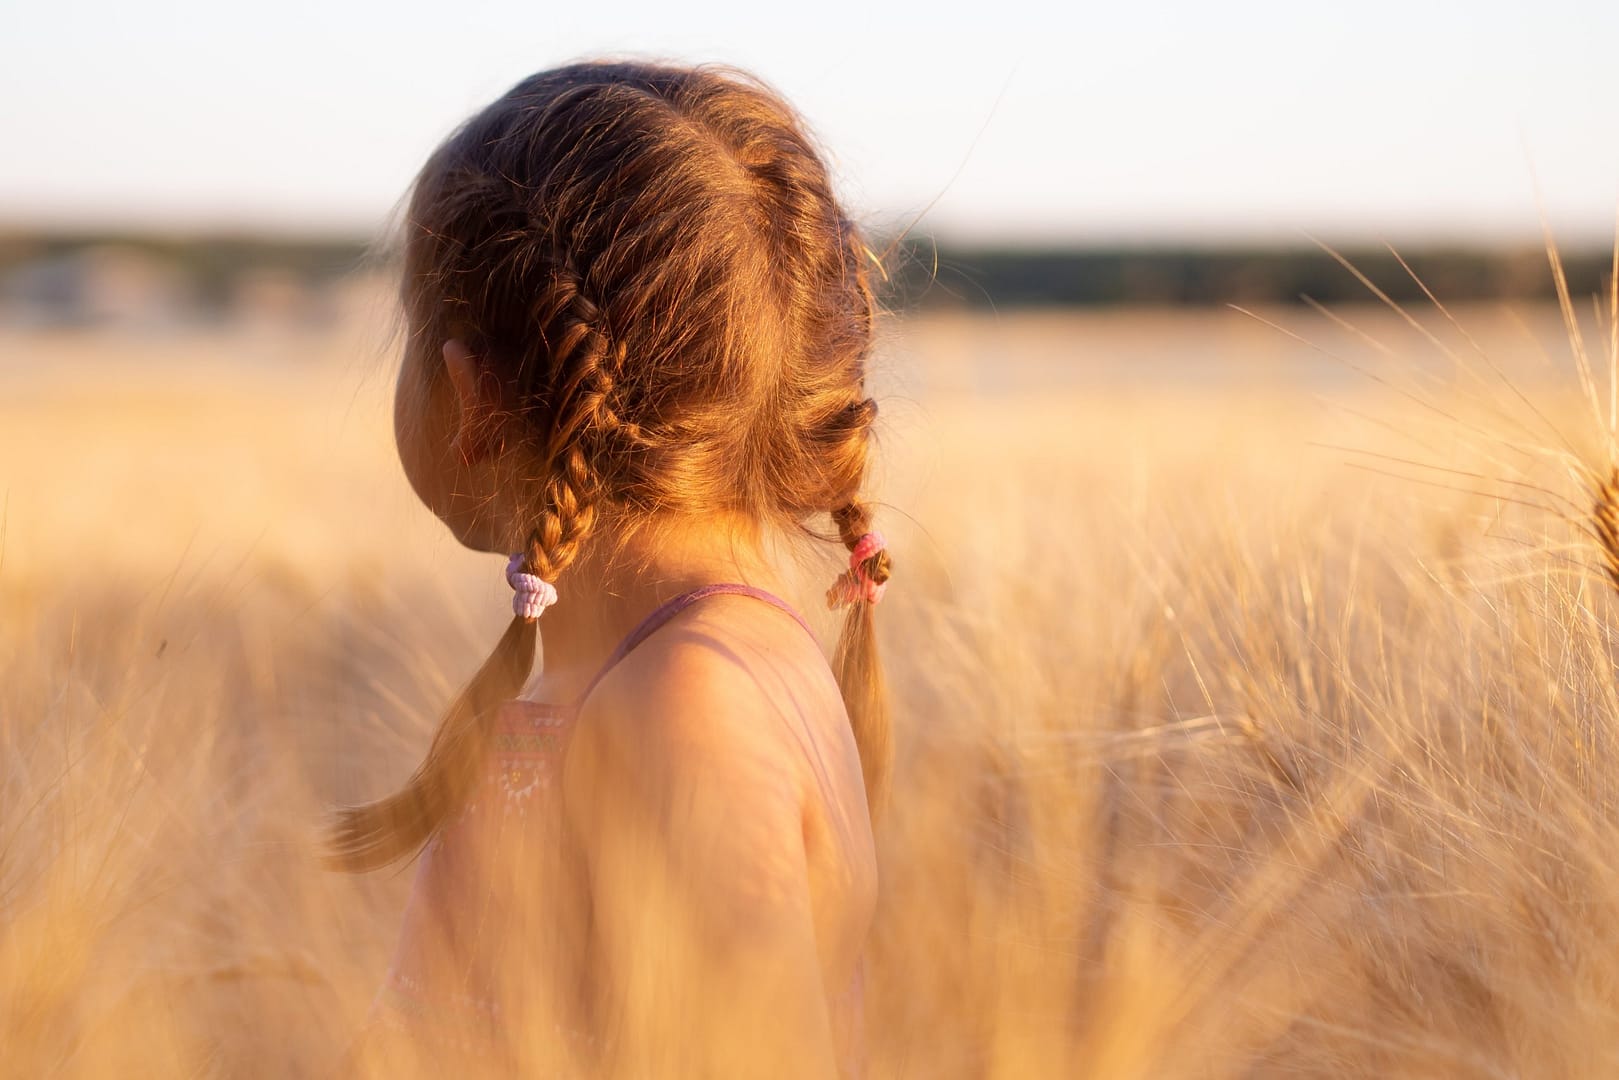 Small girl with plaits in her hair at sundown looking away from camera while standing in a field of corn that comes up to her shoulders